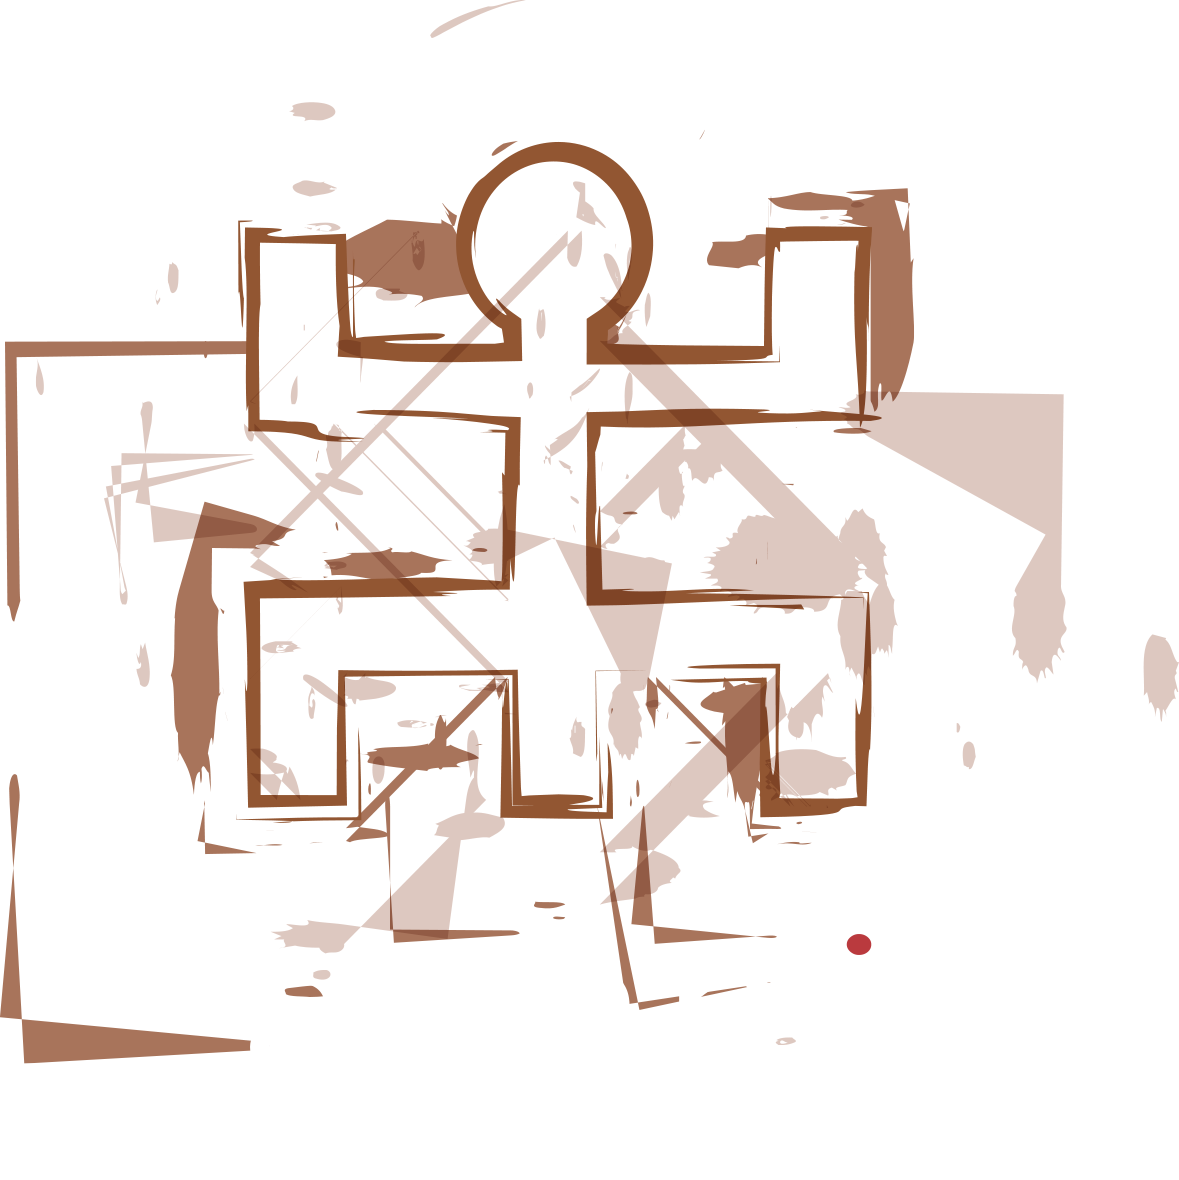 Profile picture of the artspace AMANI Gallery